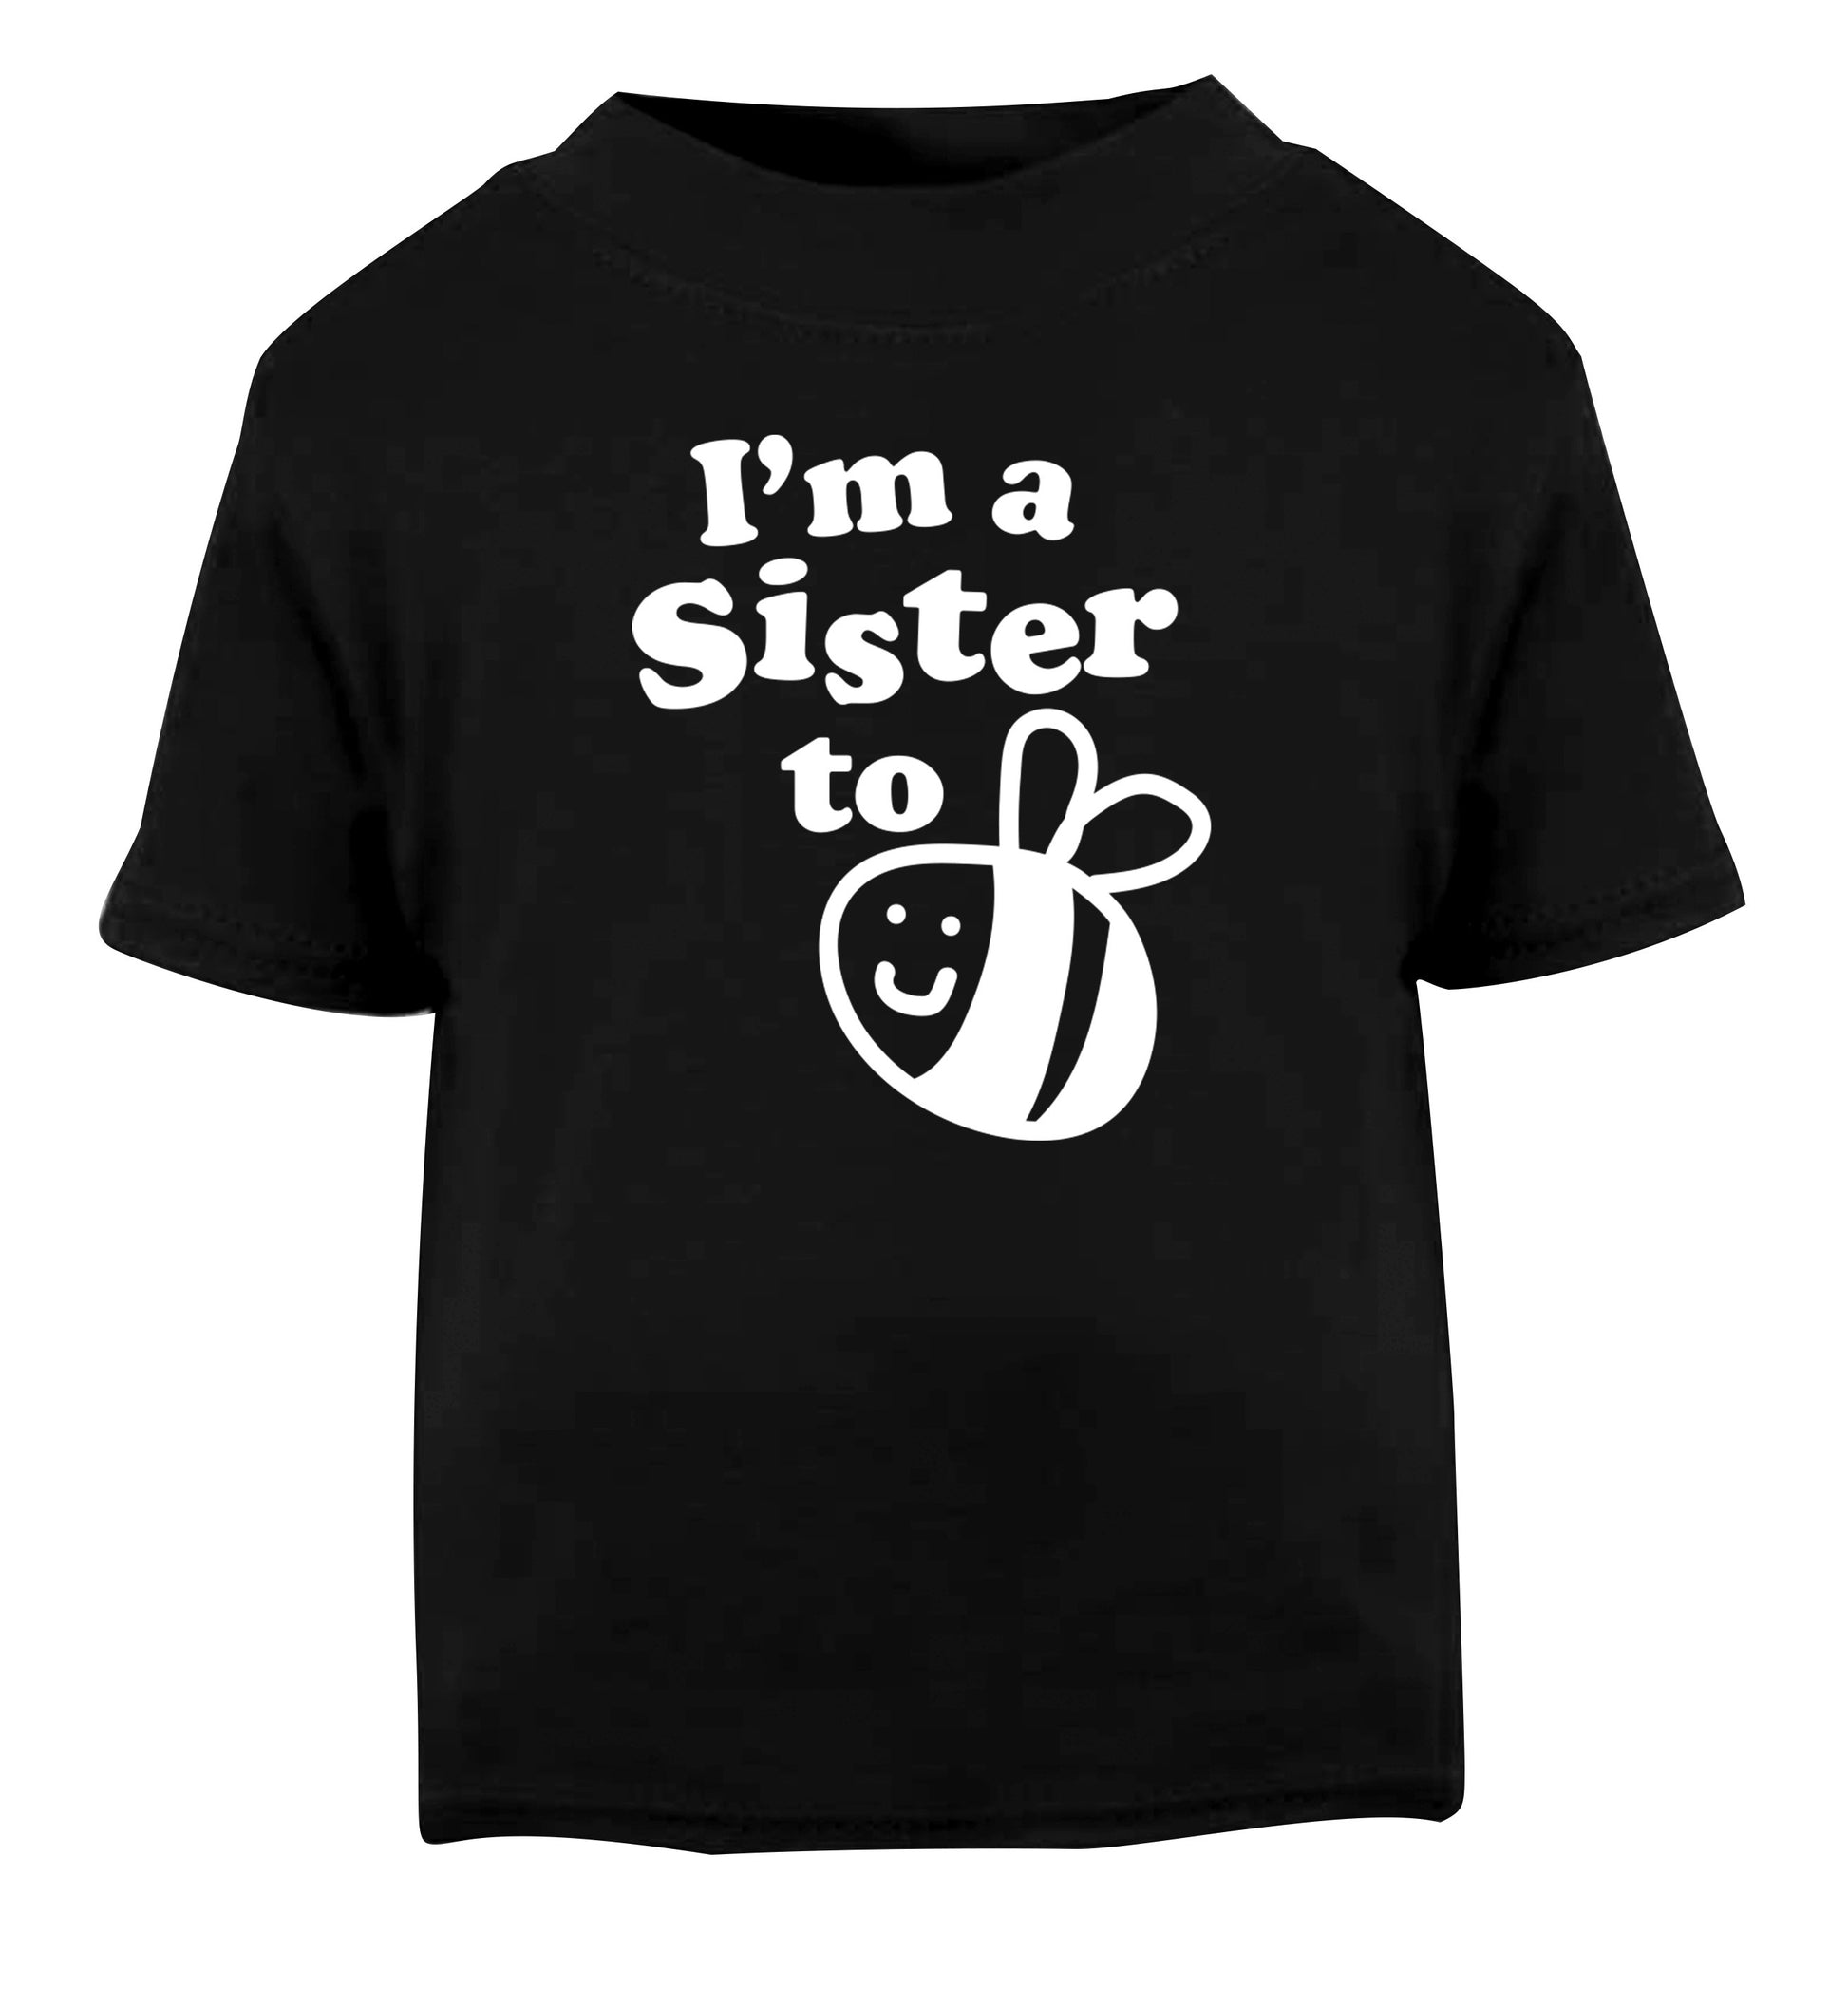 I'm a sister to be Black Baby Toddler Tshirt 2 years